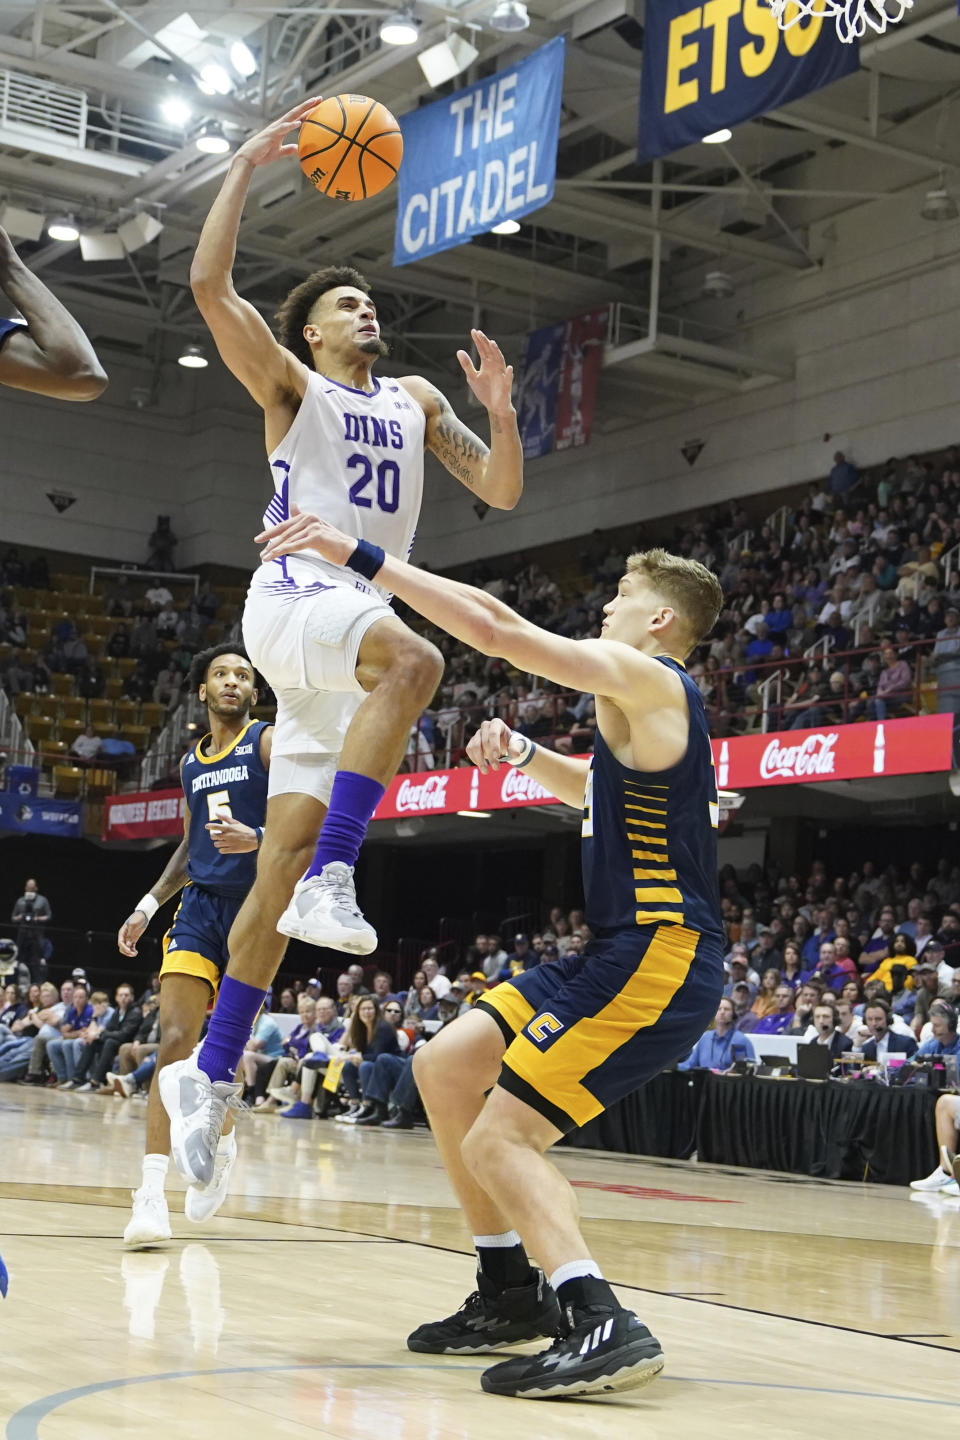 Furman forward Jalen Slawson (20) leaps to the basket over Chattanooga center Jake Stephens, right, during the second half of an NCAA men's college basketball championship game for the Southern Conference tournament, Monday, March 6, 2023, in Asheville, N.C. (AP Photo/Kathy Kmonicek)